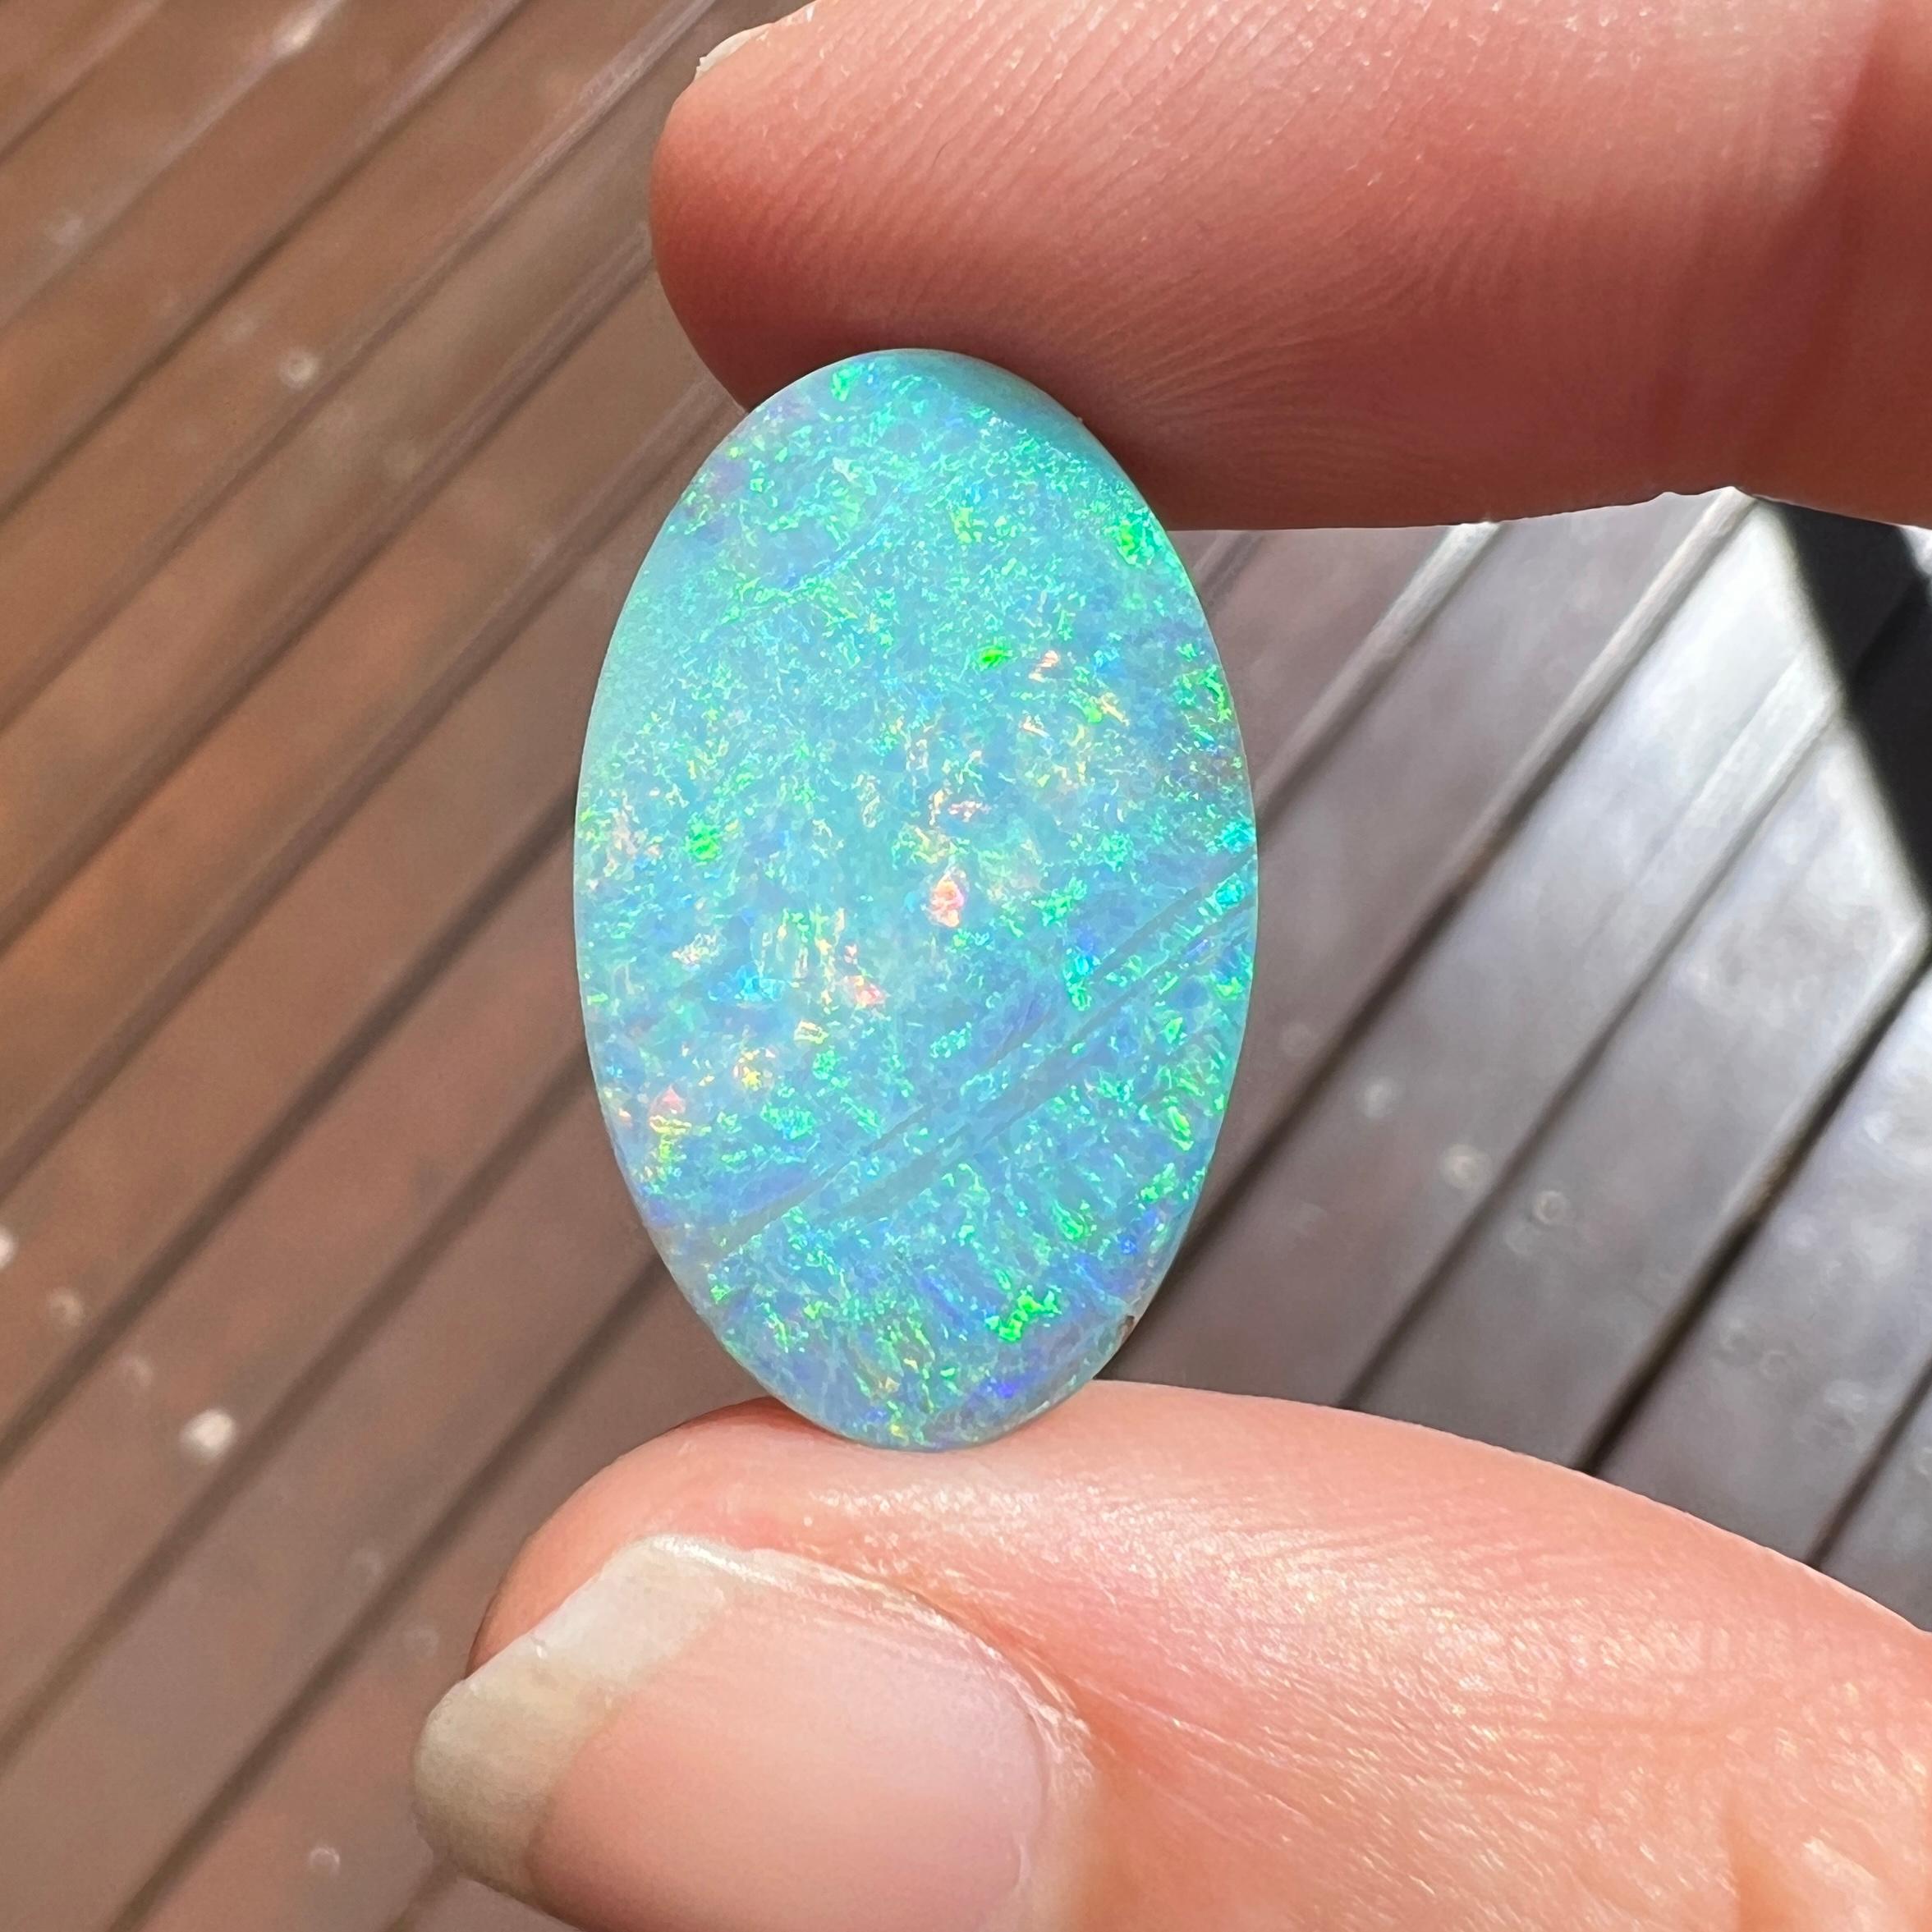 Discover the mesmerising beauty of this exquisite 13.31 Ct Australian Boulder oval opal, mined by Sue Cooper from her Mt. Margaret opal mine in Western Queensland, Australia.  

This particular gem holds a special place in our heart. Carefully cut